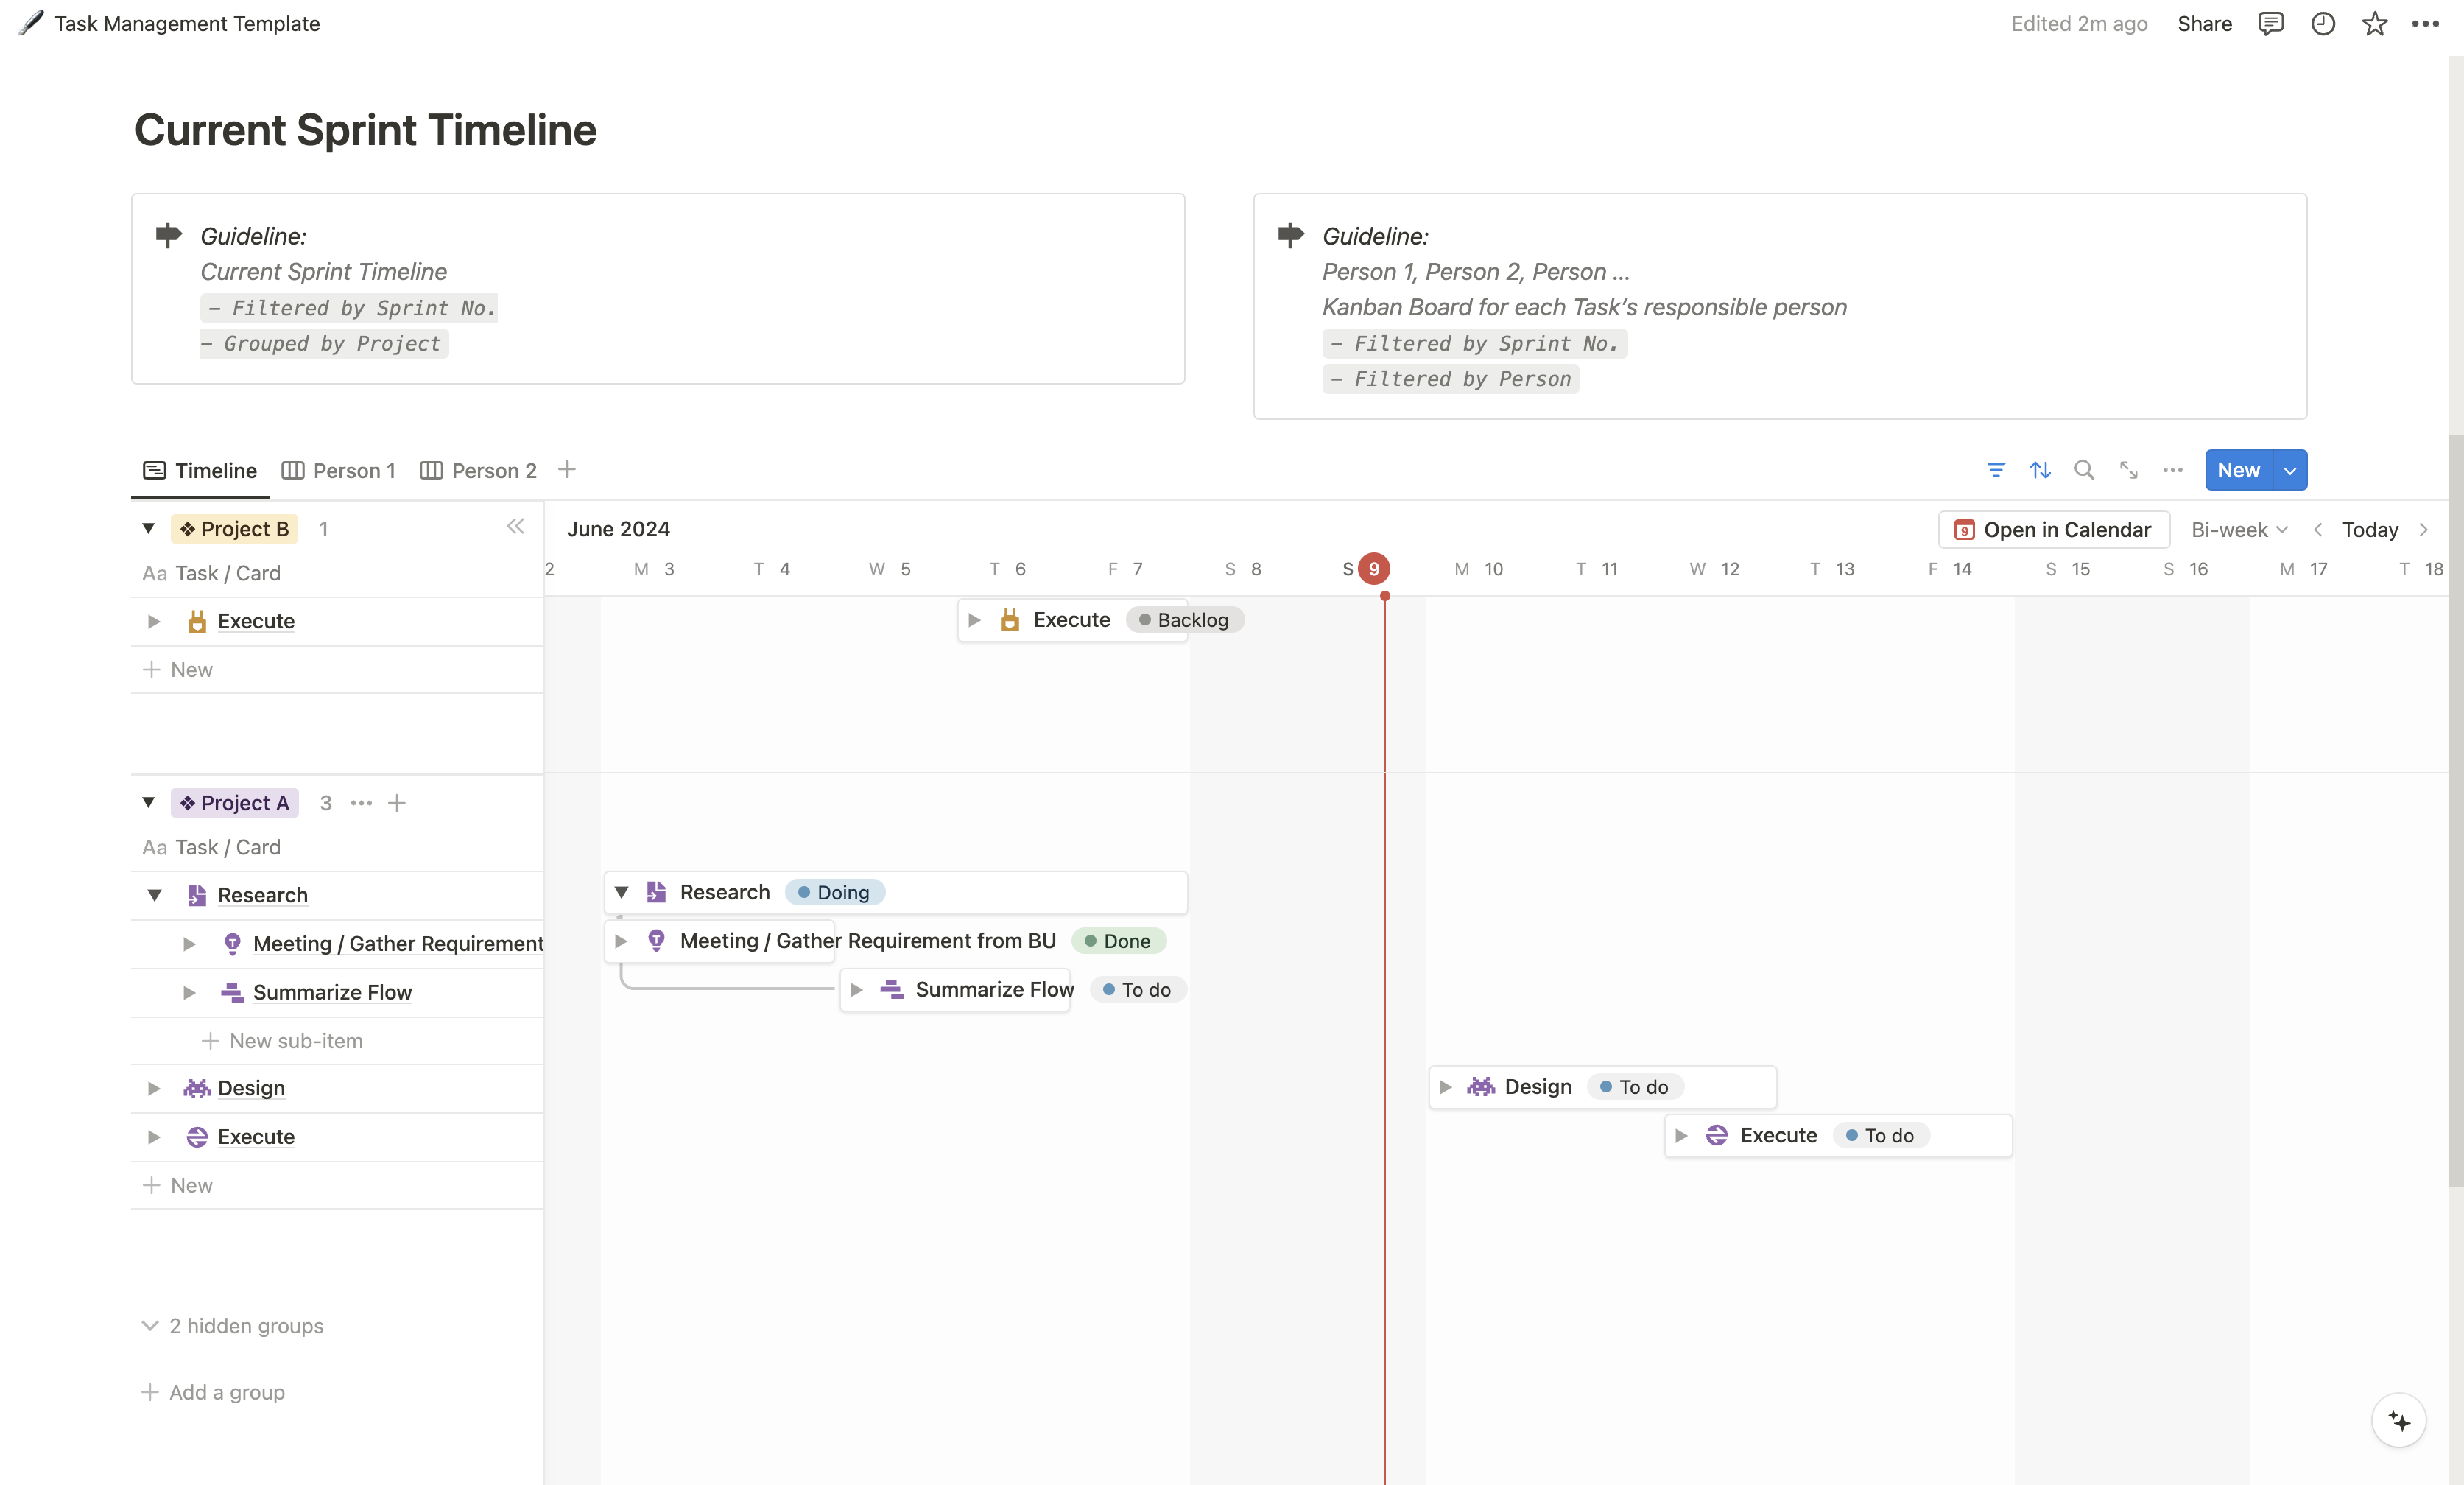 Team Management Template for better-organizing tasks in the multi-project. Visualize project timeline, project status, progress, and kanban board for each team member. Easy to use for both project owners and team members. 
